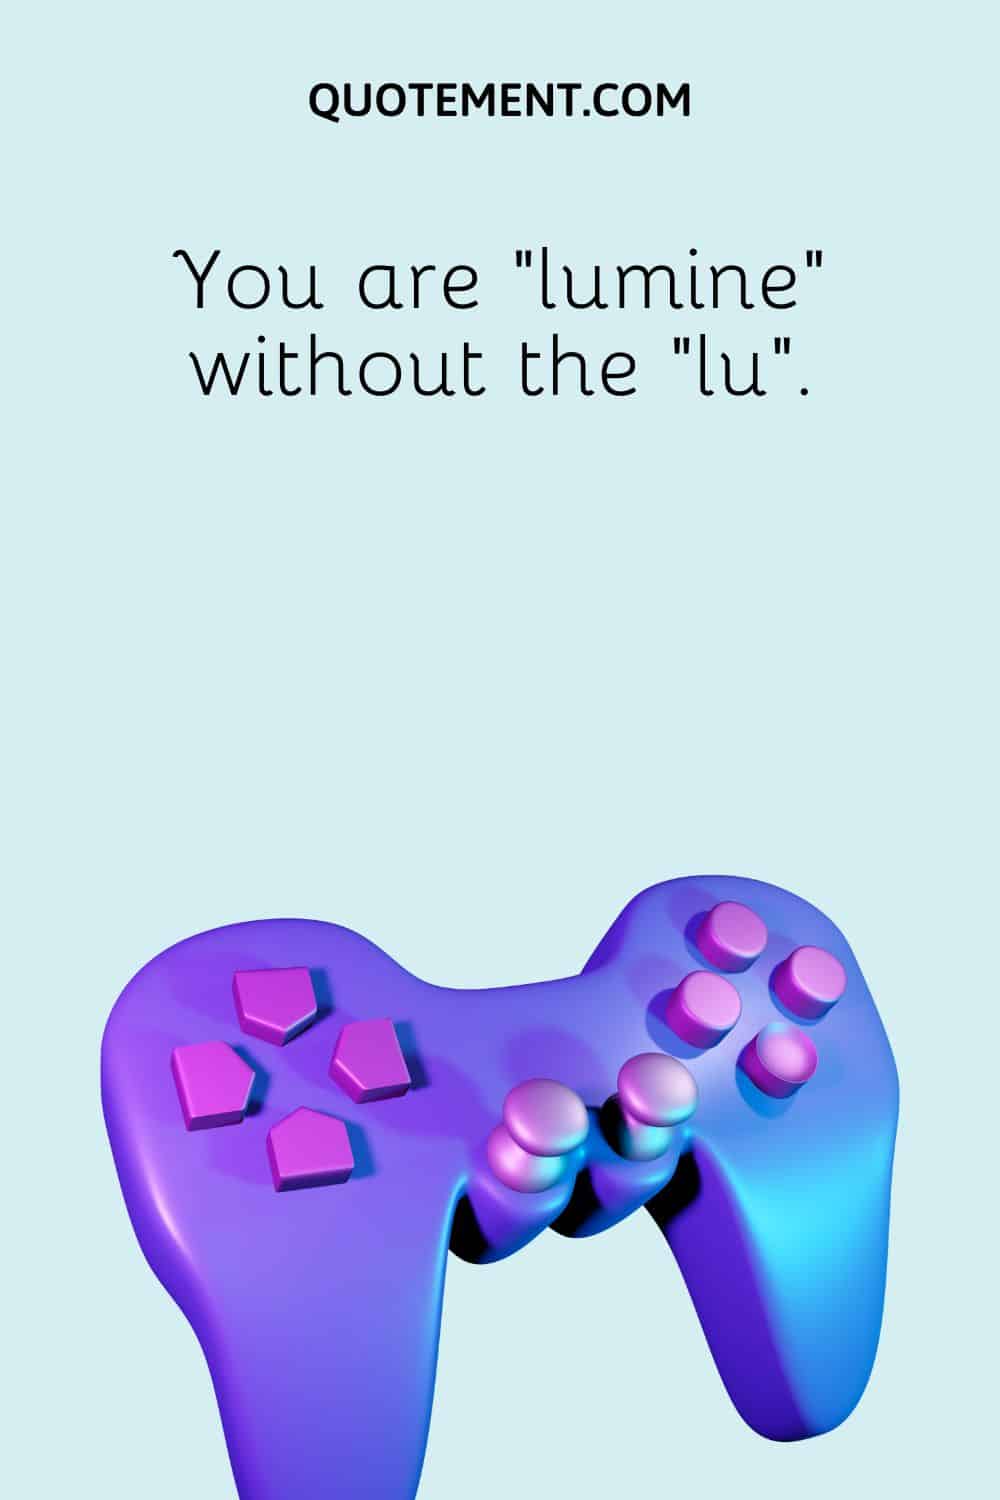 You are “lumine” without the “lu”.